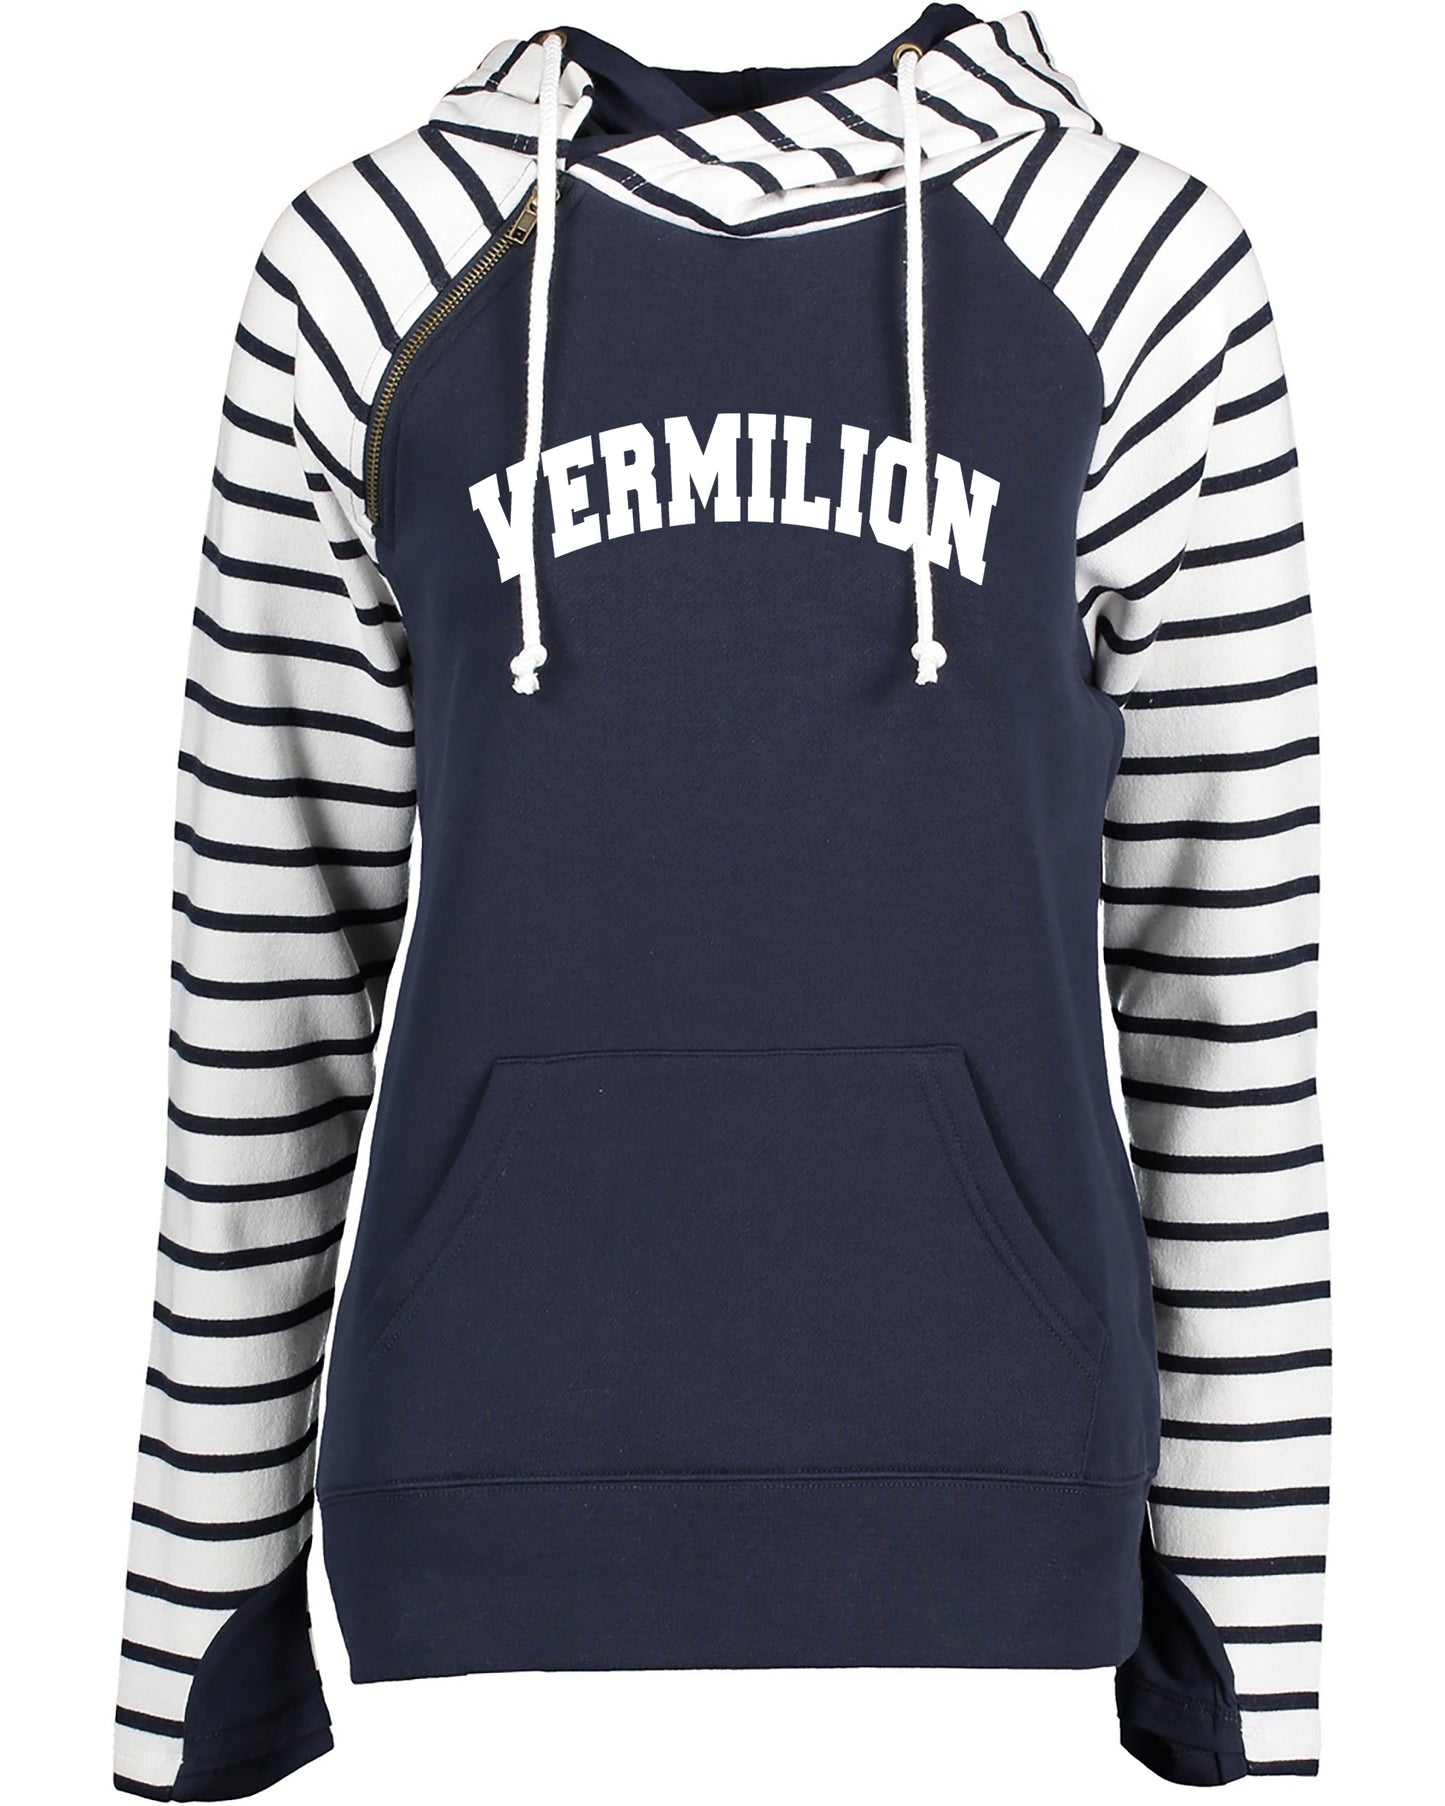 VERMILION STRIPE ZIPPERED HOODIE WITH THUMB HOLES